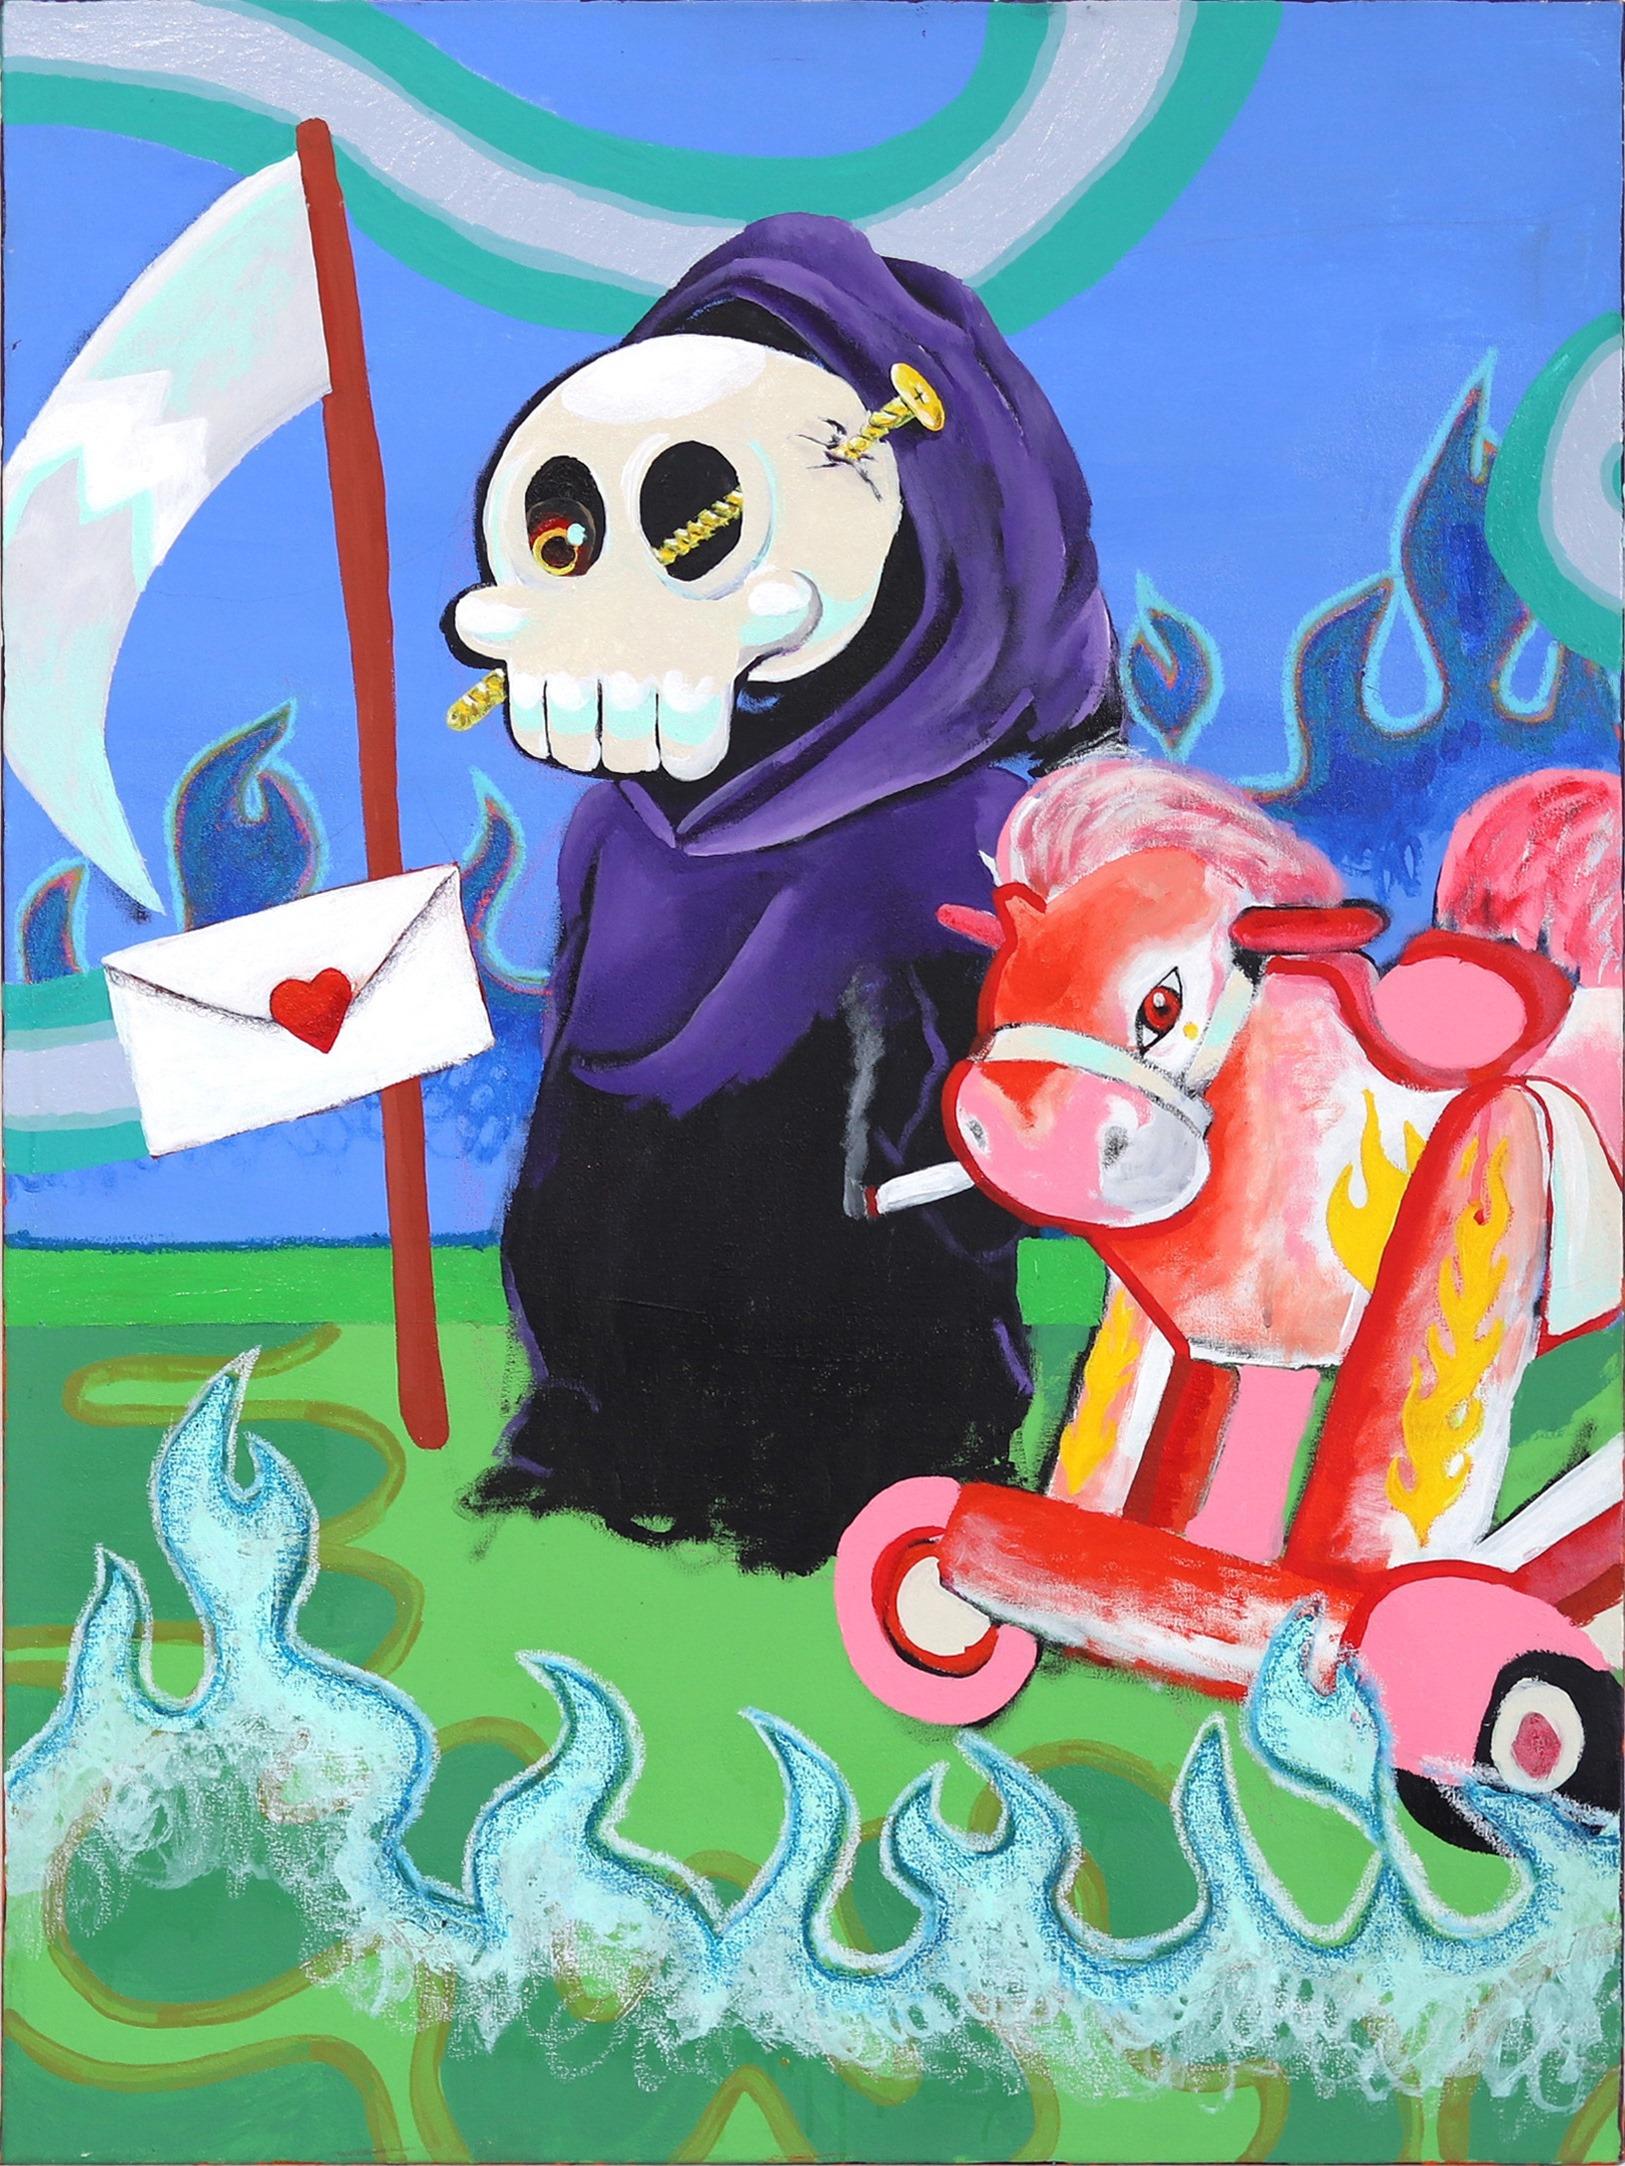 Dear Death, Why Do You Have To Be So Mean - Original Pop Art